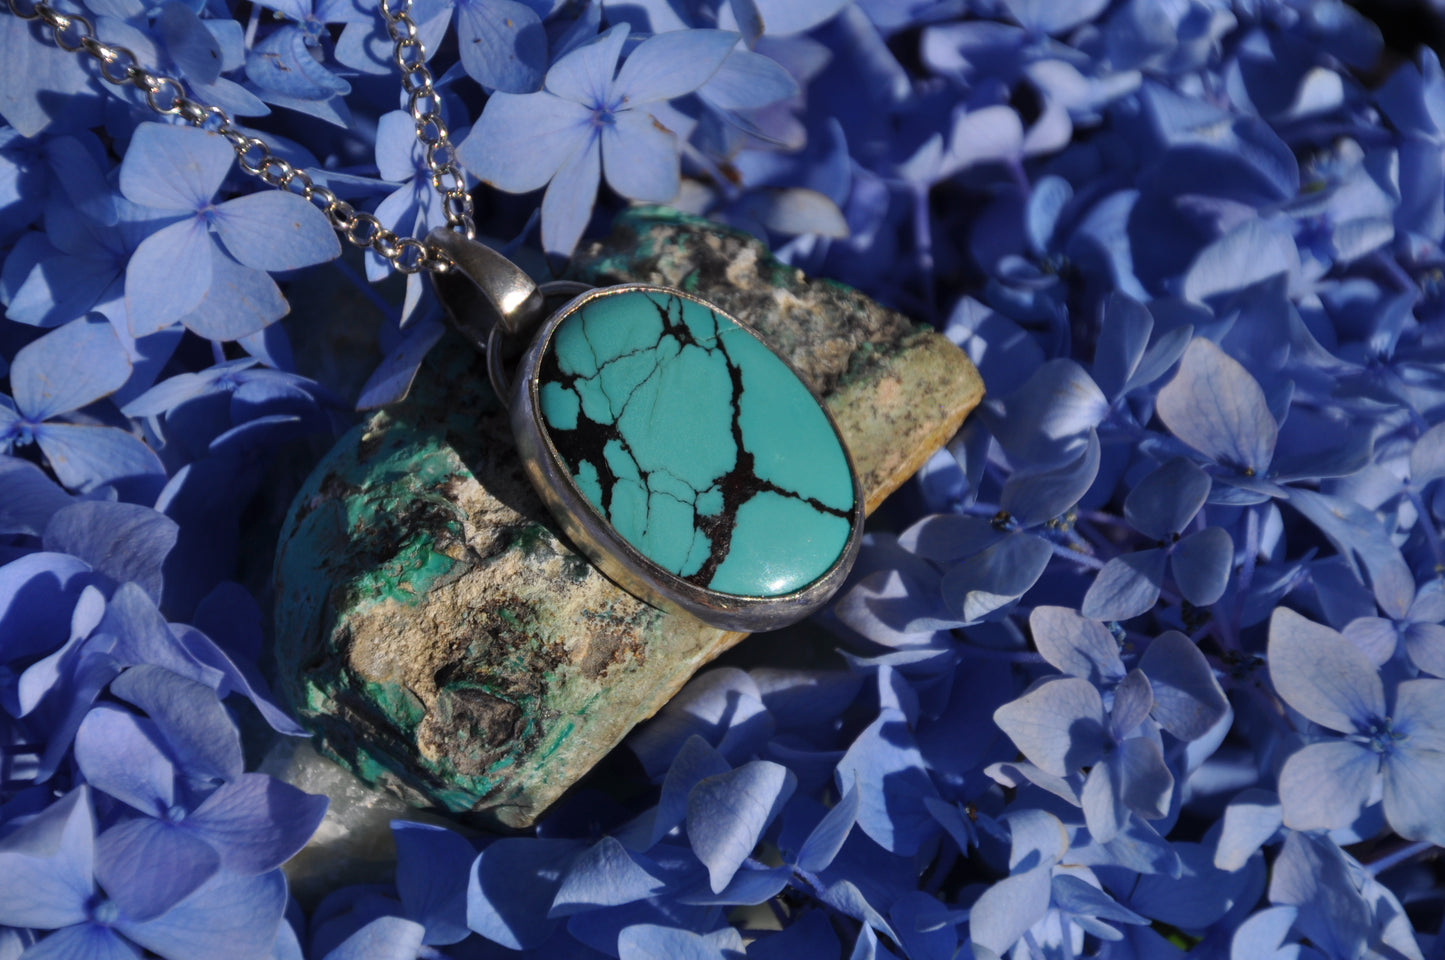 Turquoise Oval Sterling Silver Pendant Necklace